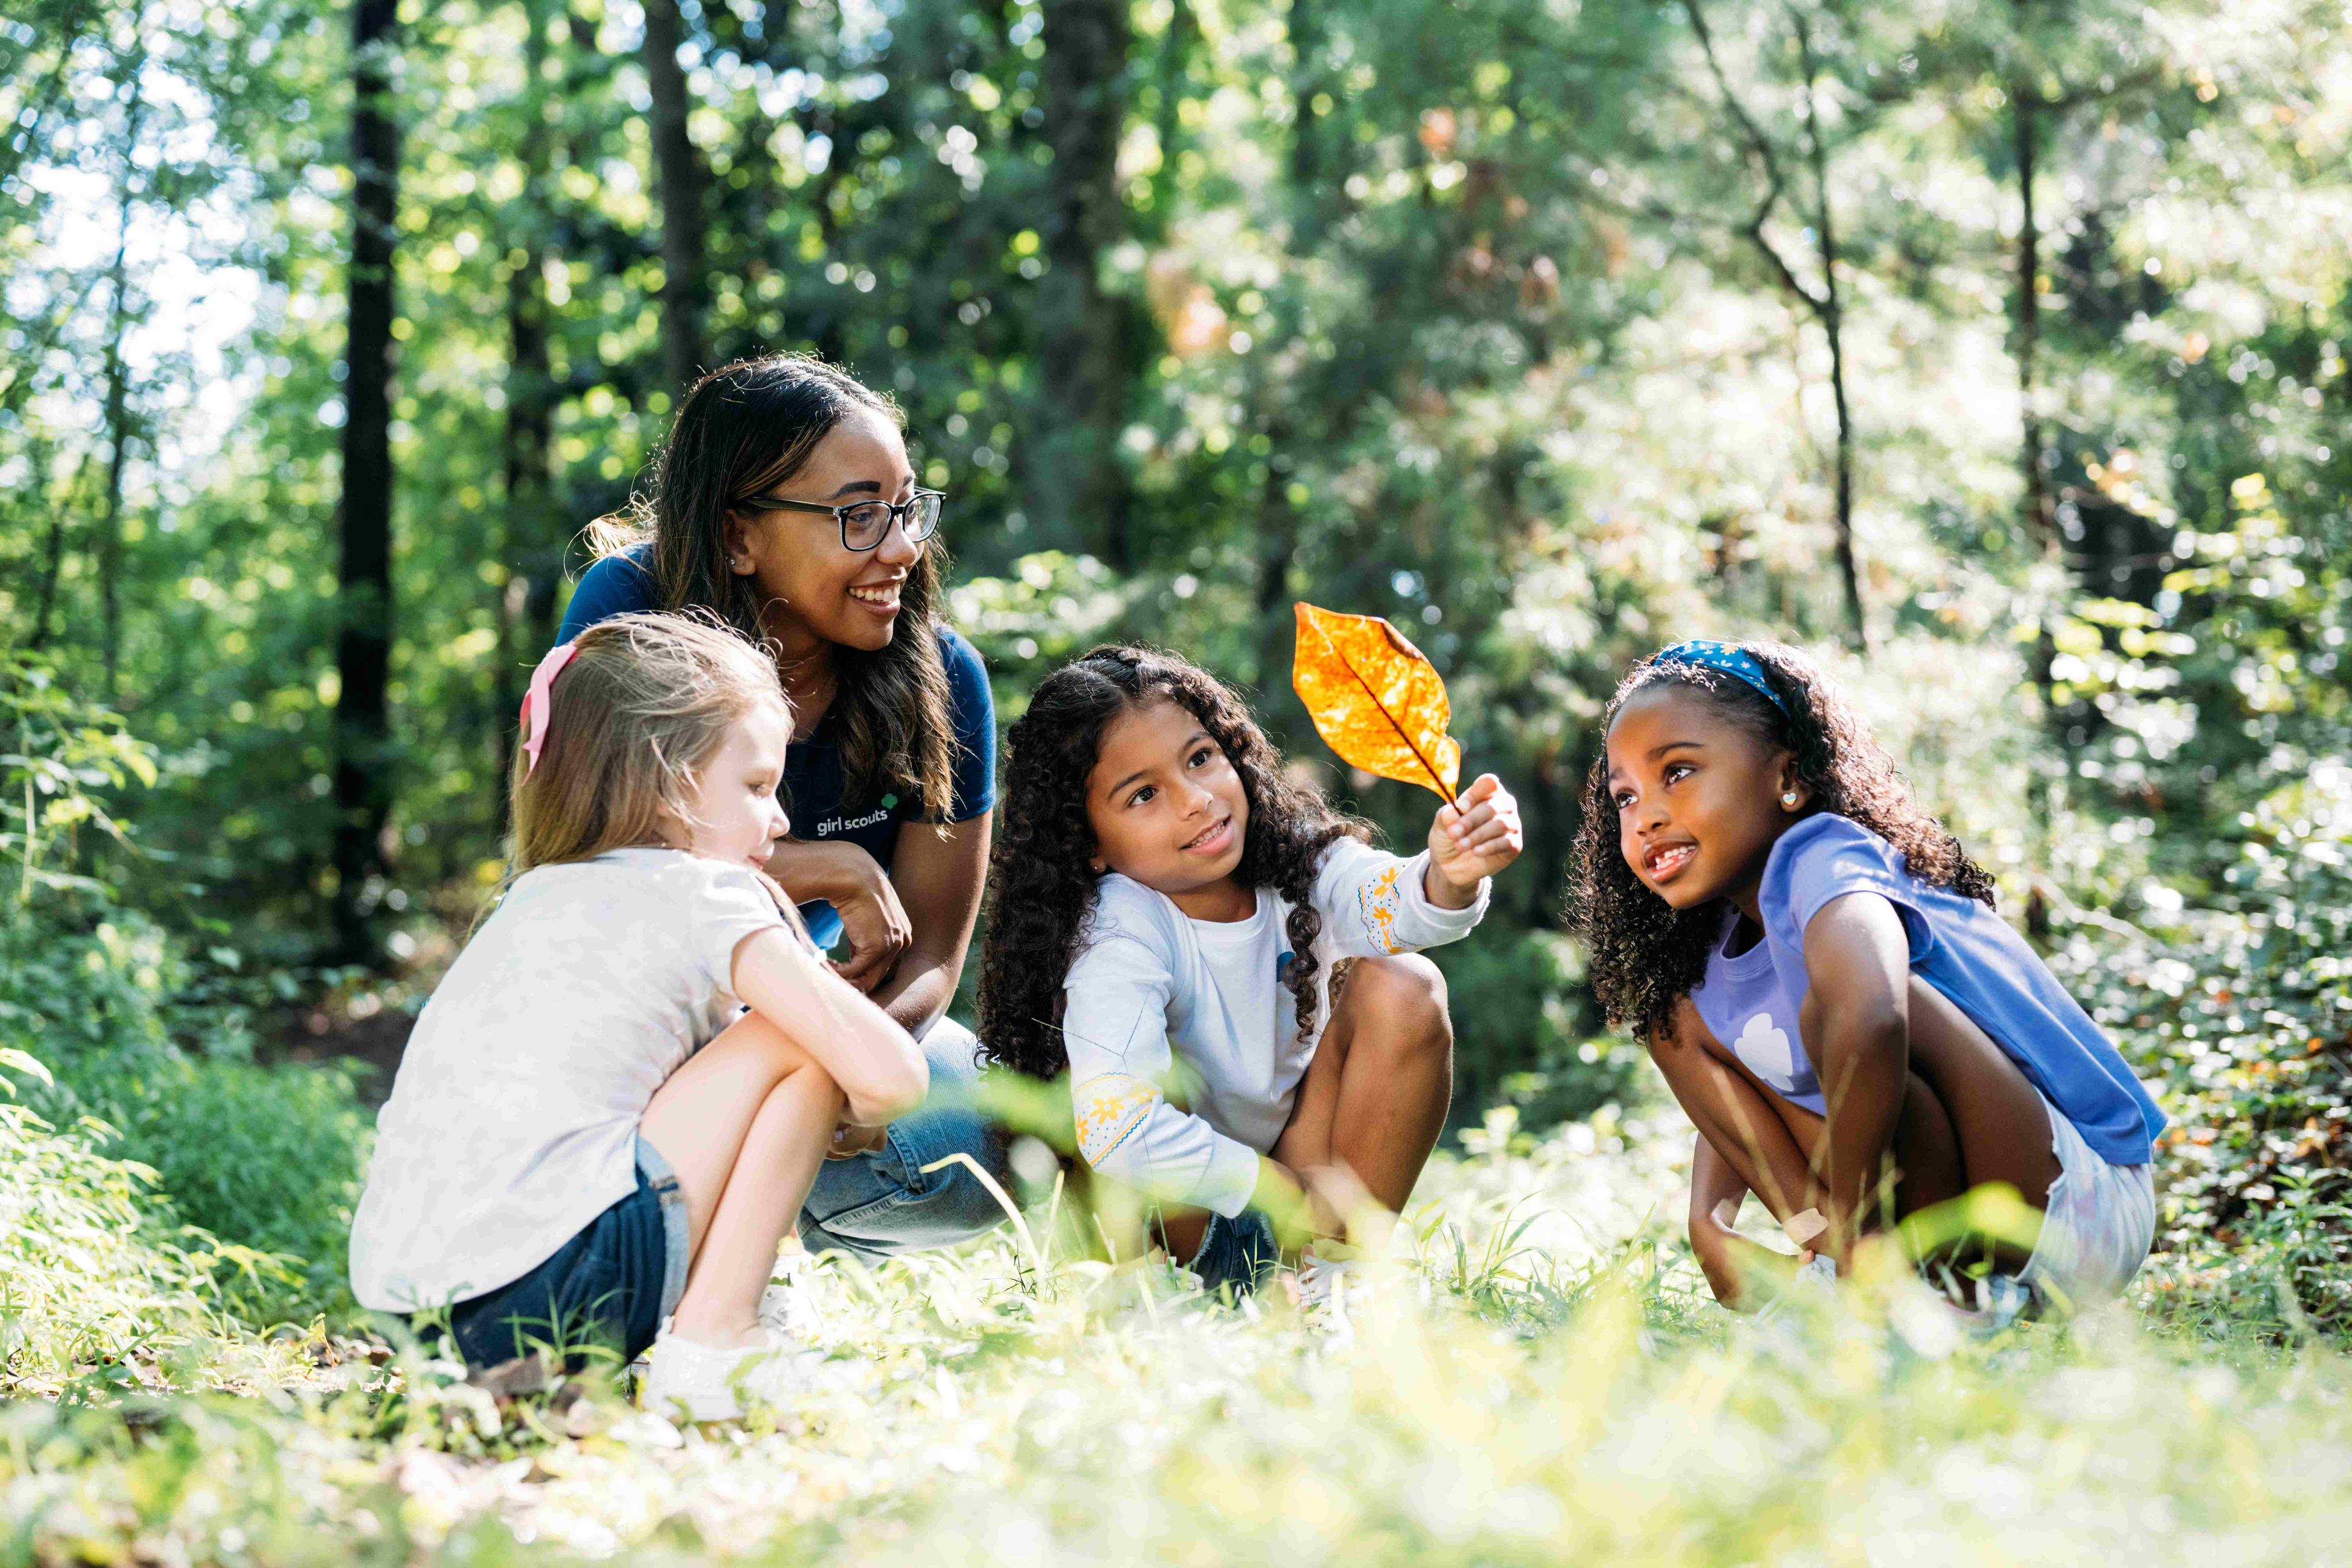 A group of Girl Scouts spending time outdoors and learning about nature with their troop leader.